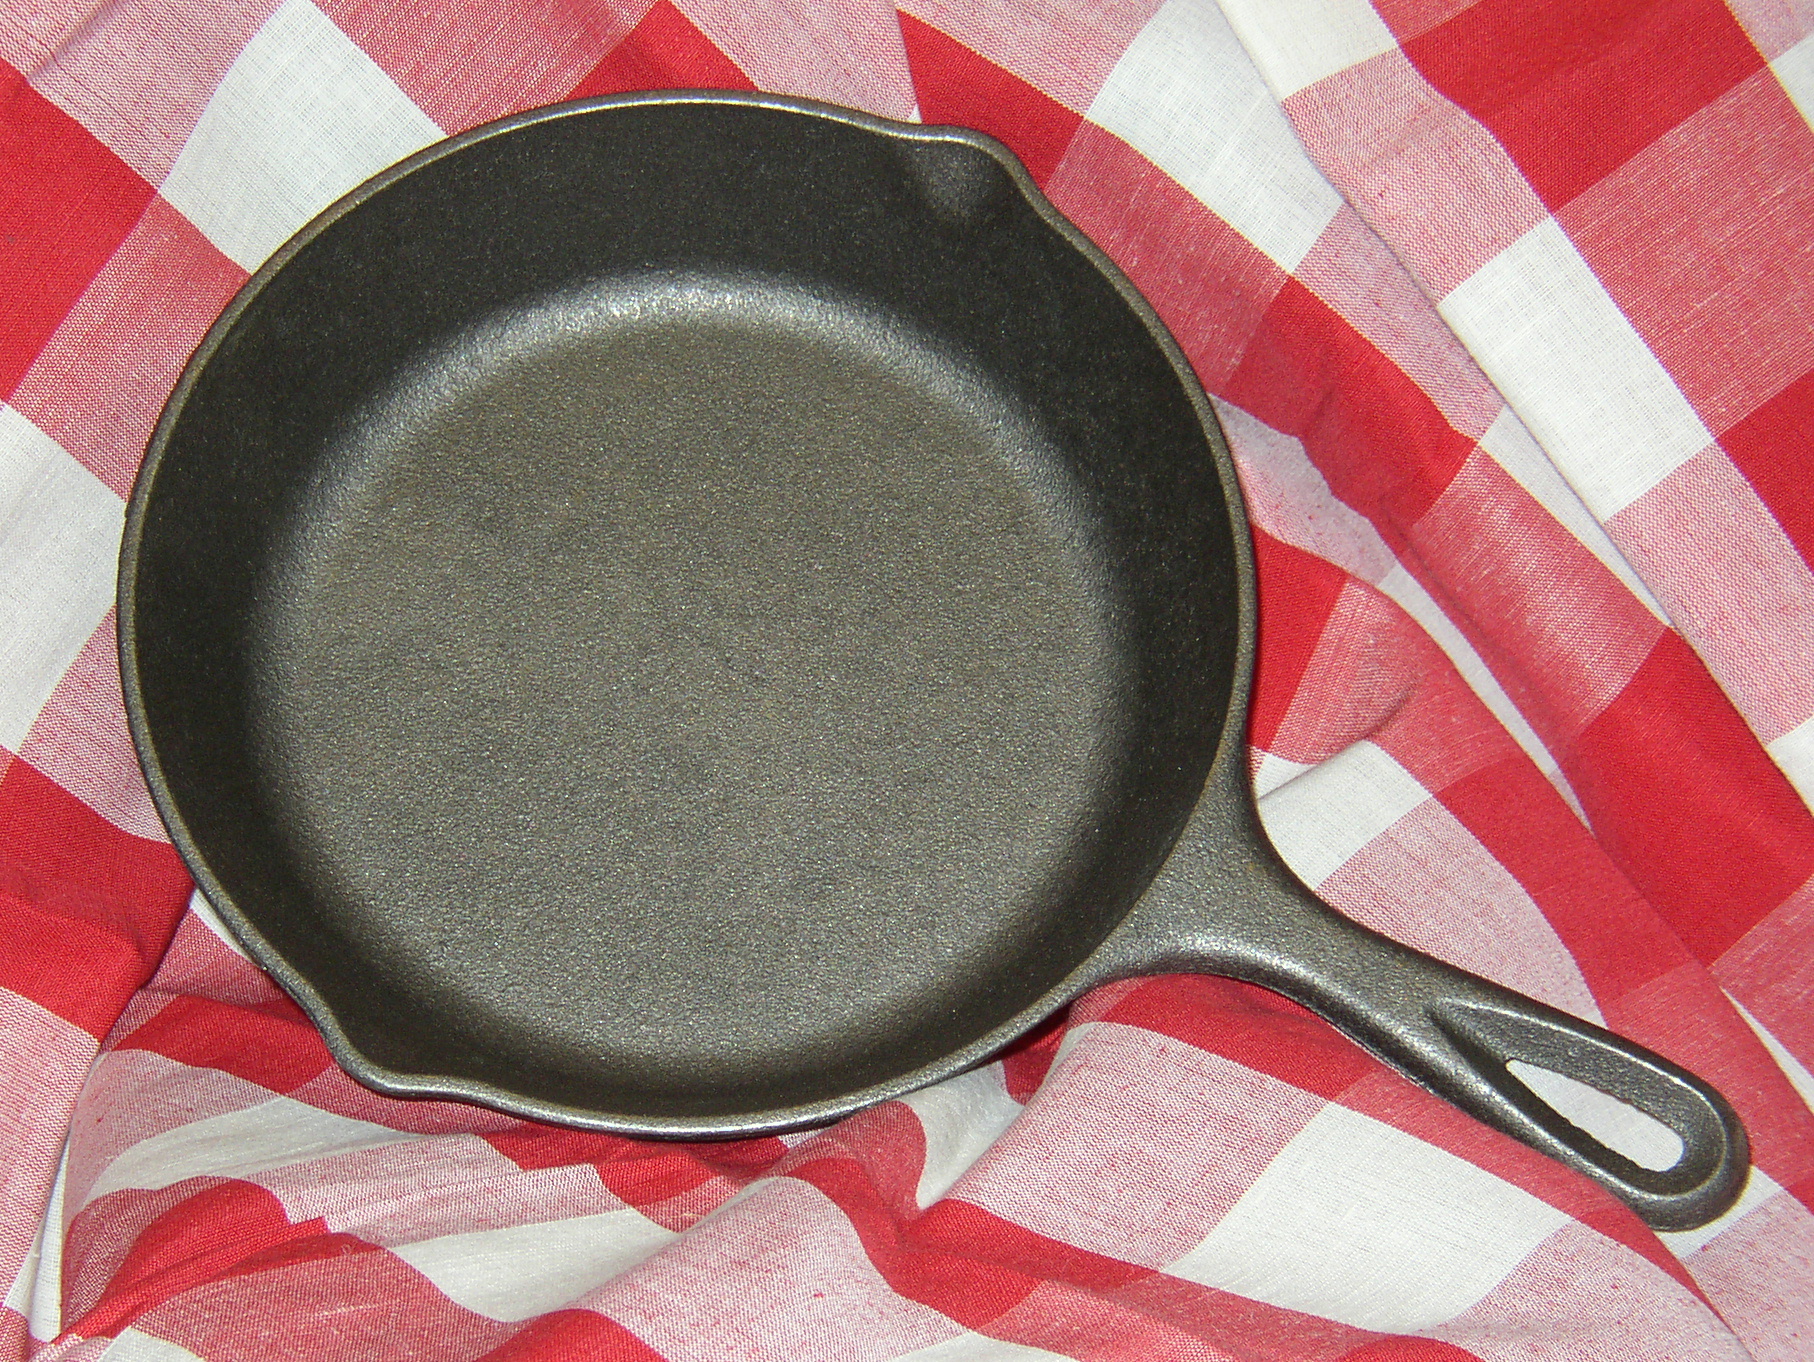 Cast iron skillet, natural healthy cooking since 1896.